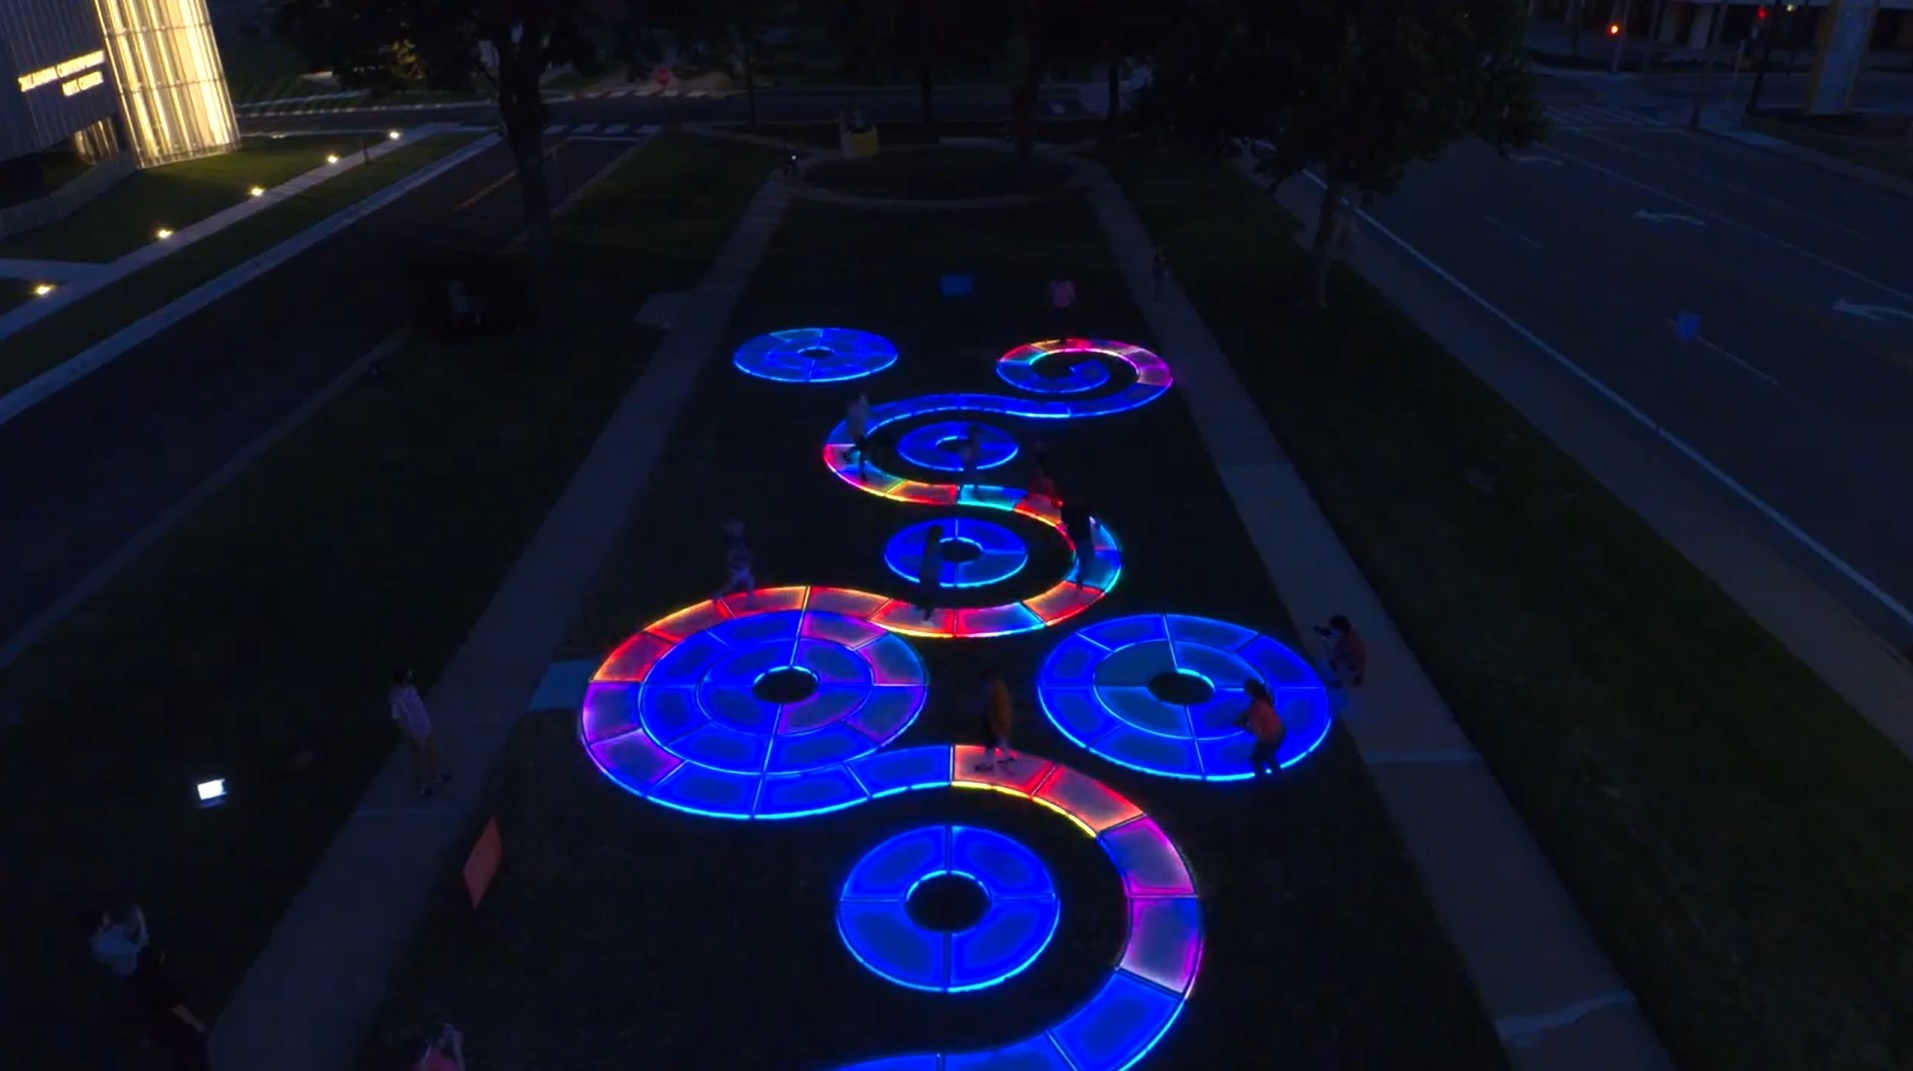 An aerial photo depicts a winding light sculpture at night